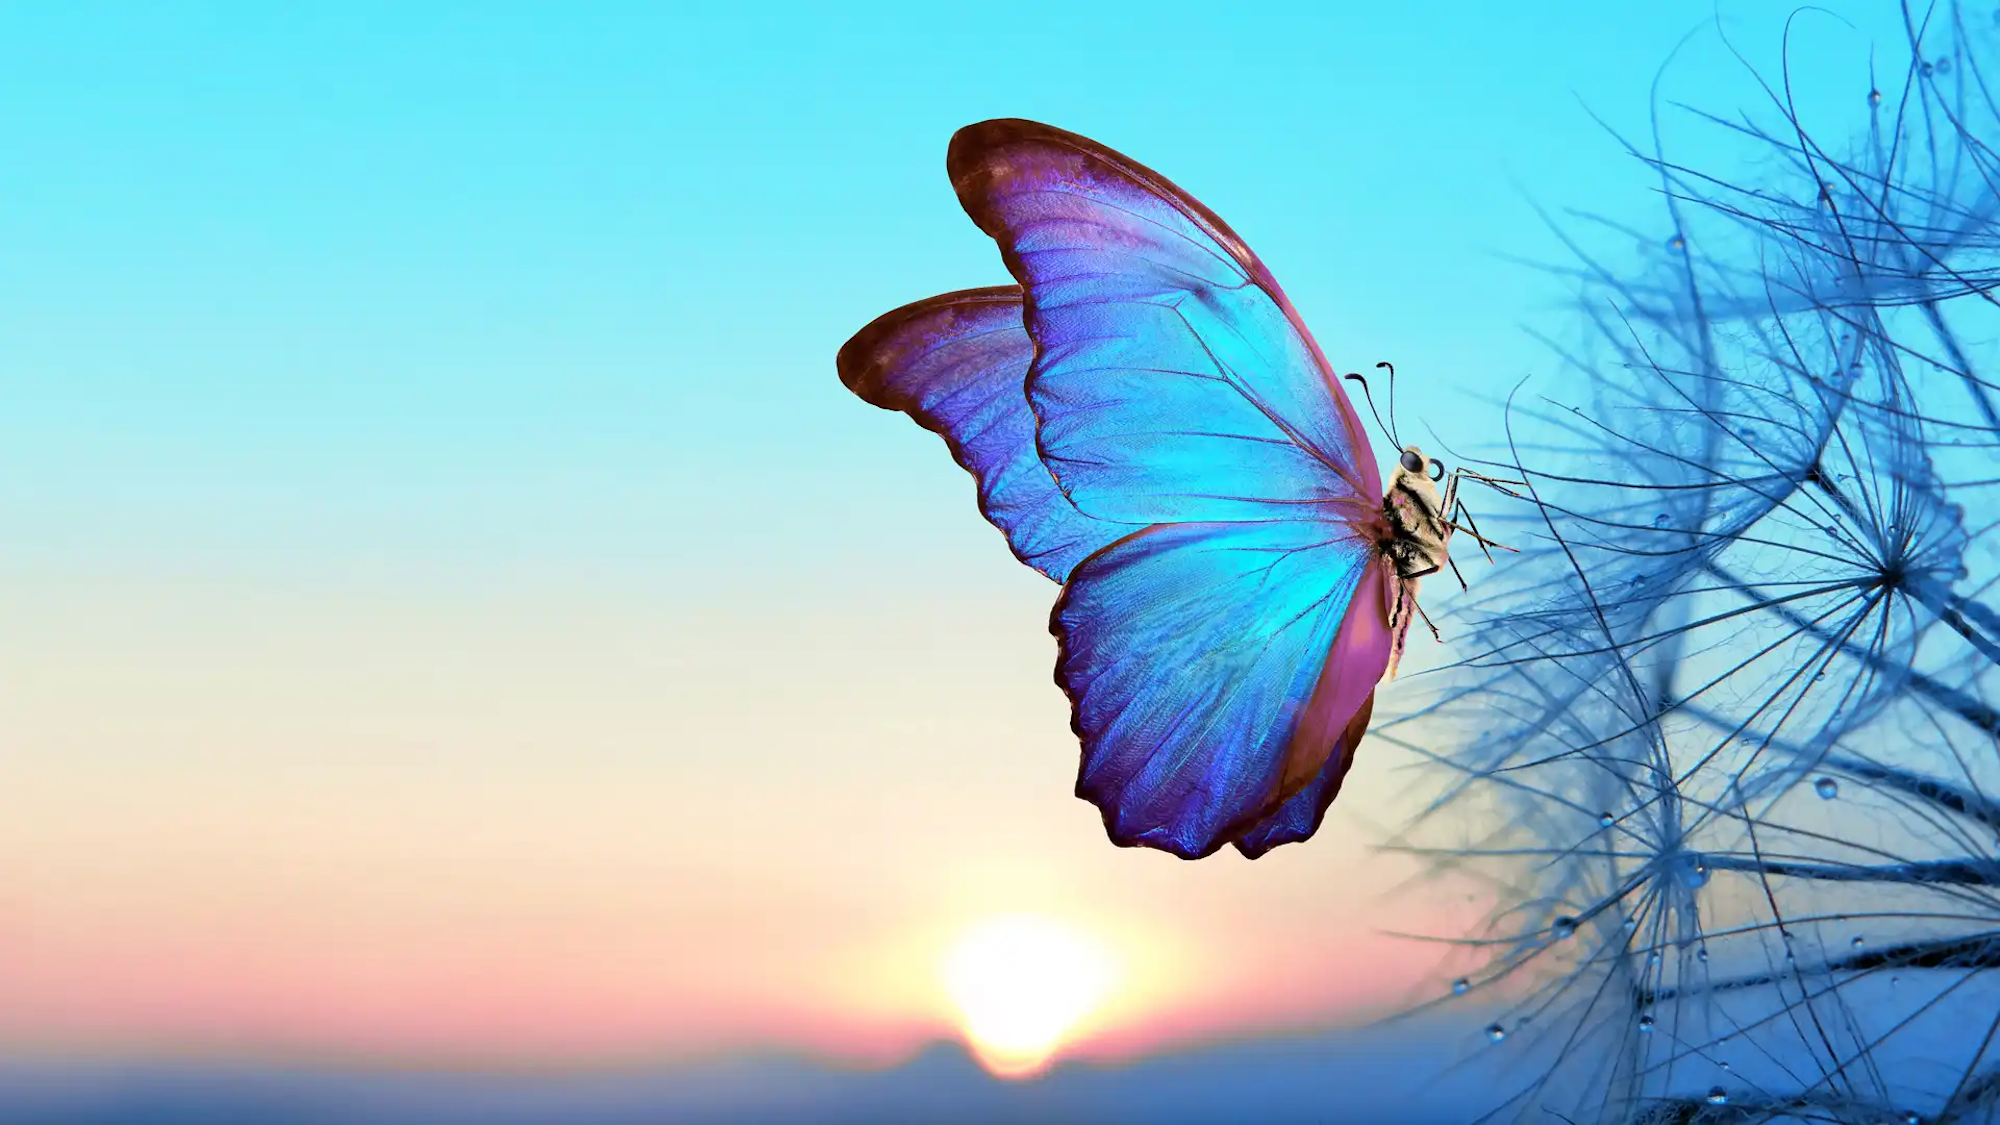 Butterfly on cold landscape representing the idea of change and digital transformation